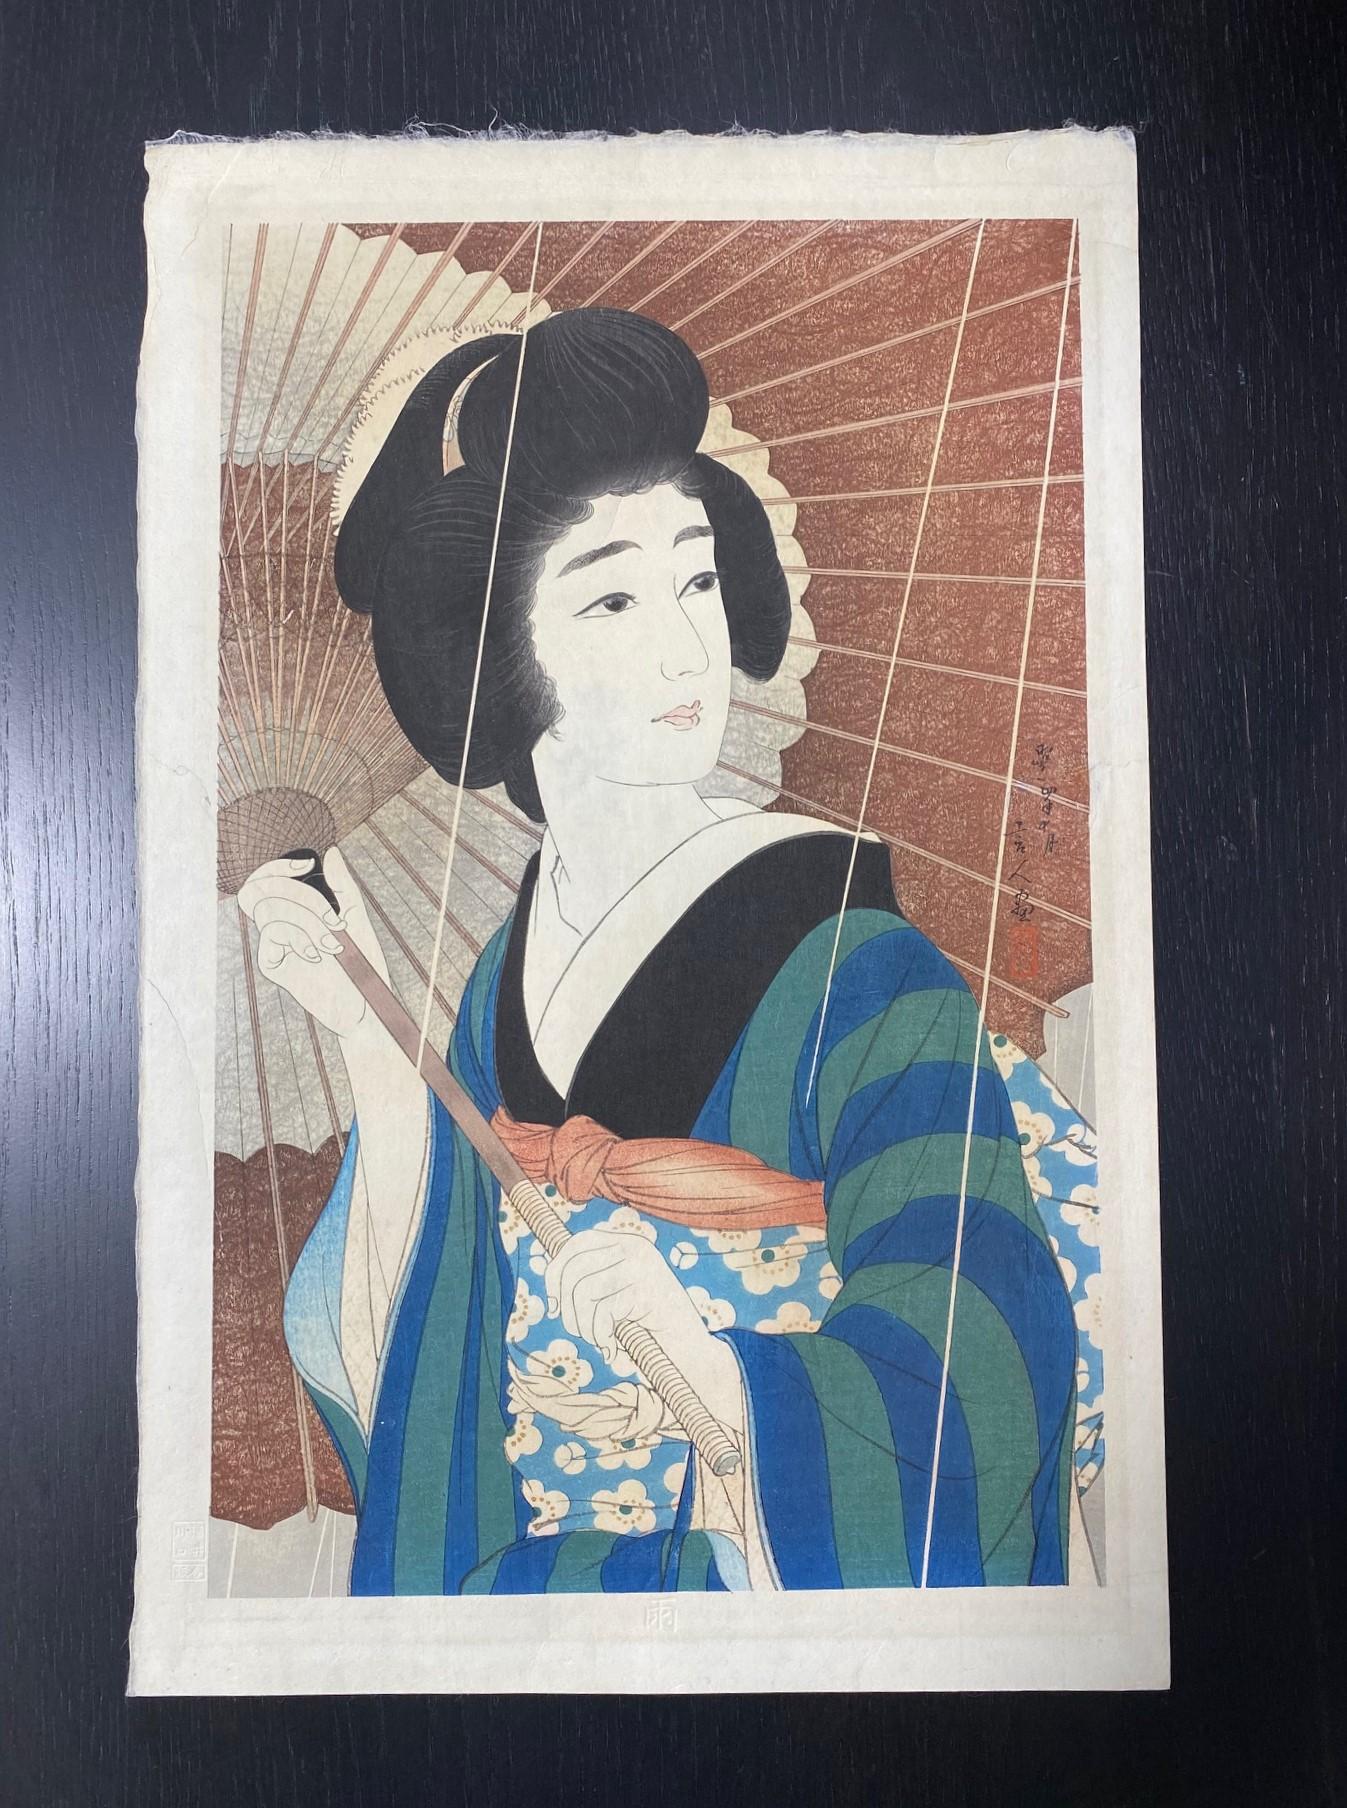 A beautiful and strongly composed woodblock print by renowned Japanese painter/artist Torii Kotondo. This work, titled Rain (Ame), is a highly coveted pre-war printing done in 1929 (the title 